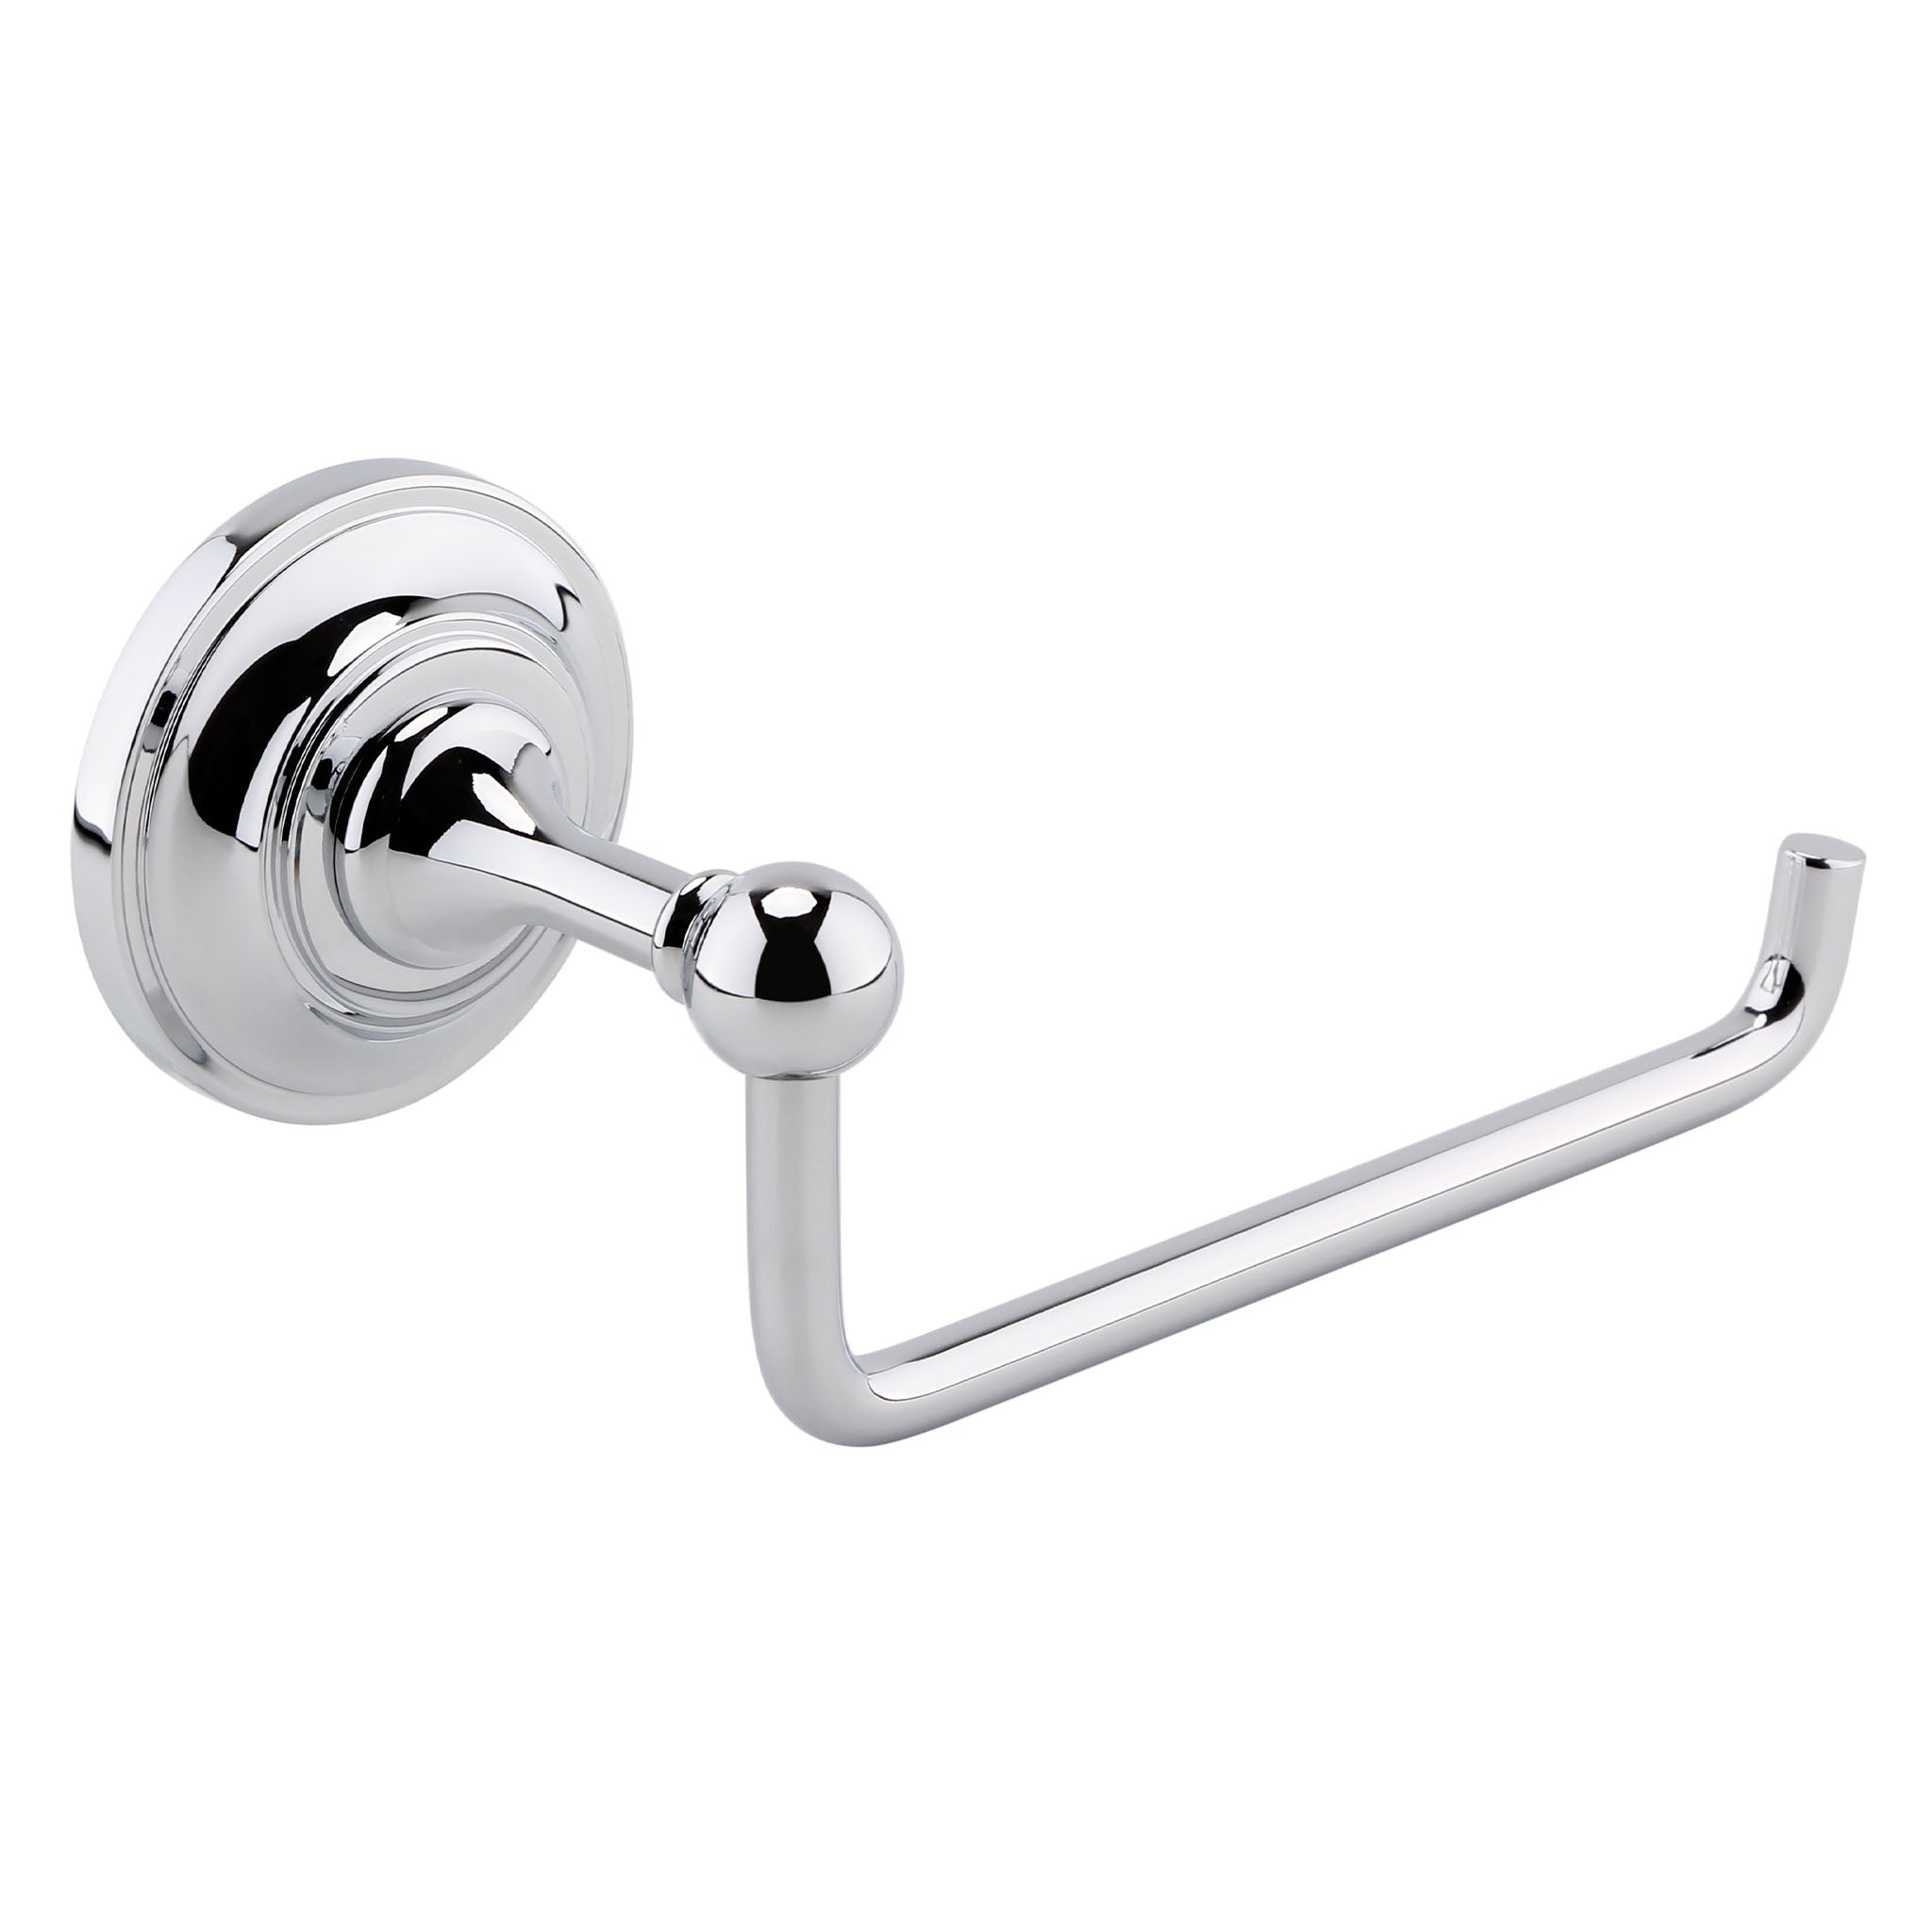 Windisch by Nameeks Freestanding Toilet Roll Holder; Chrome 89225-CR